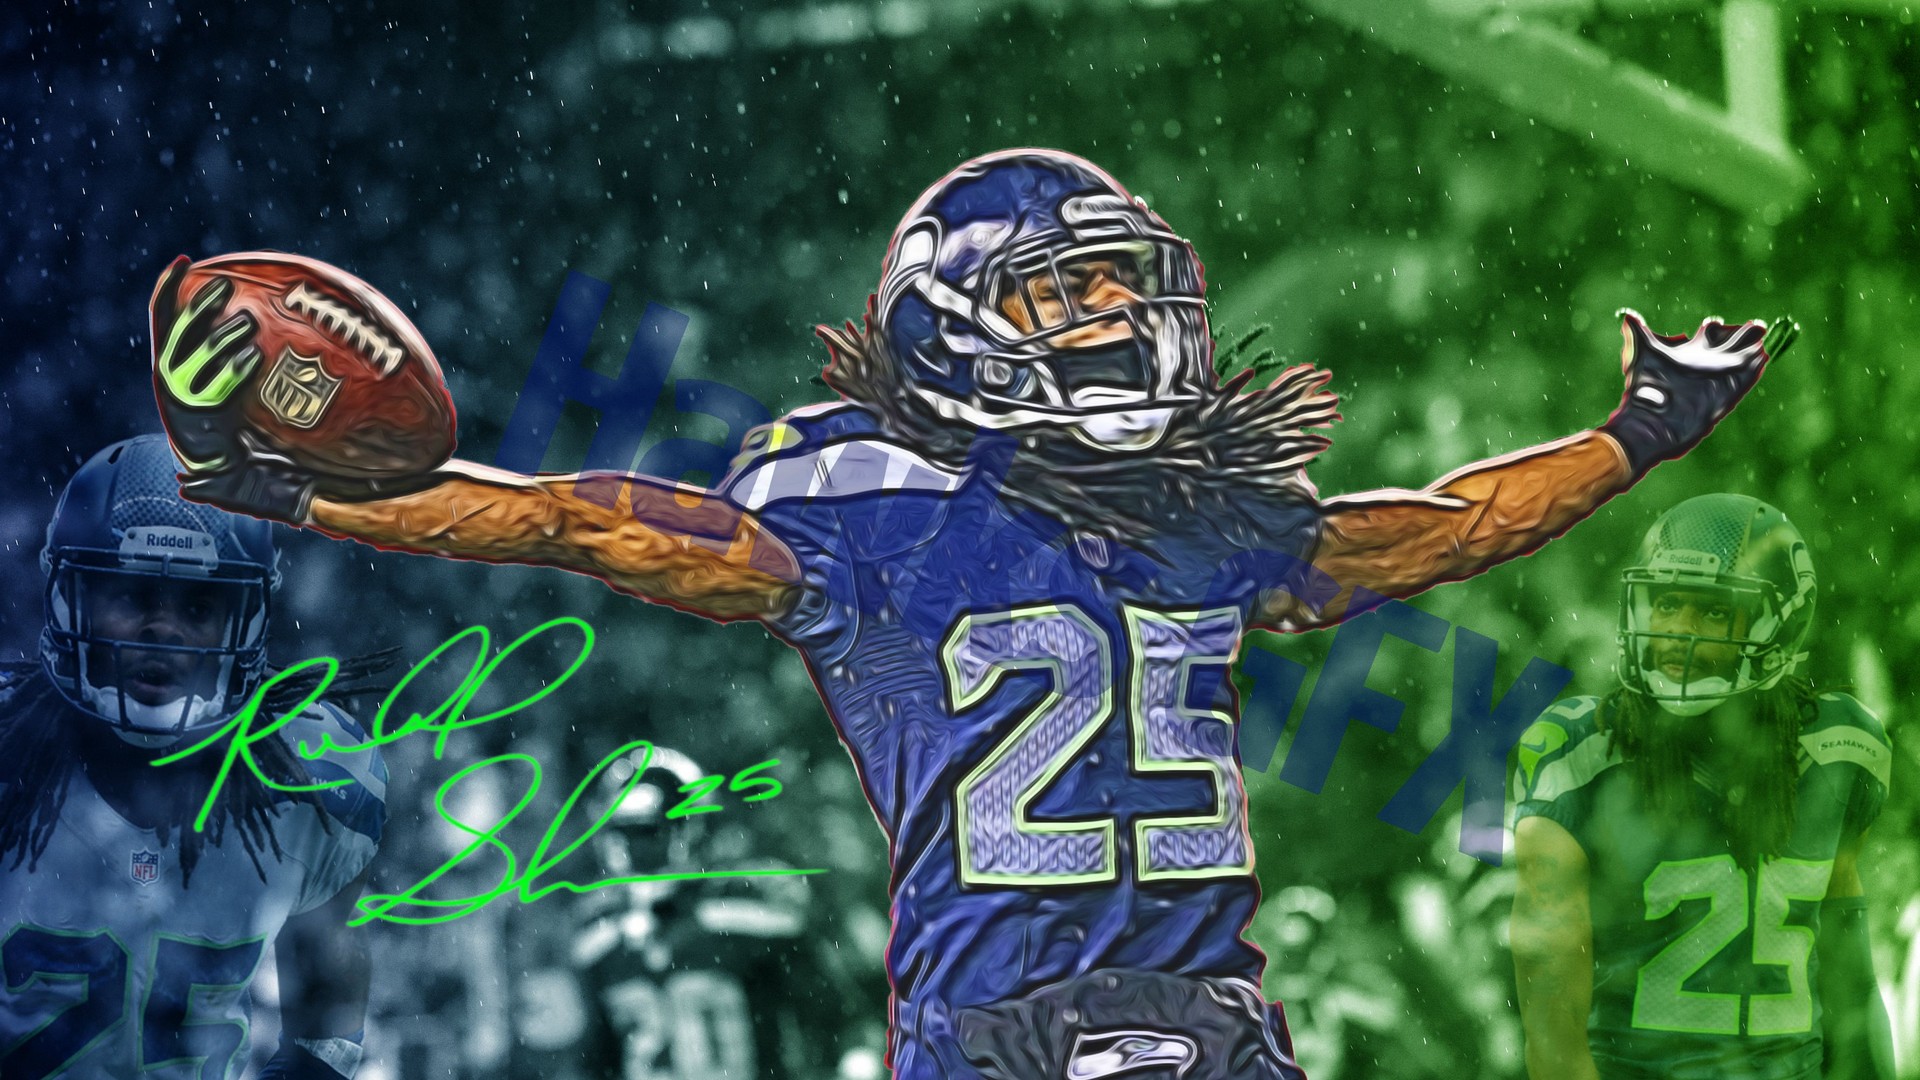 Cool Nfl Hd Wallpapers With High-resolution Pixel - Cool Football Backgrounds Seahawks - HD Wallpaper 